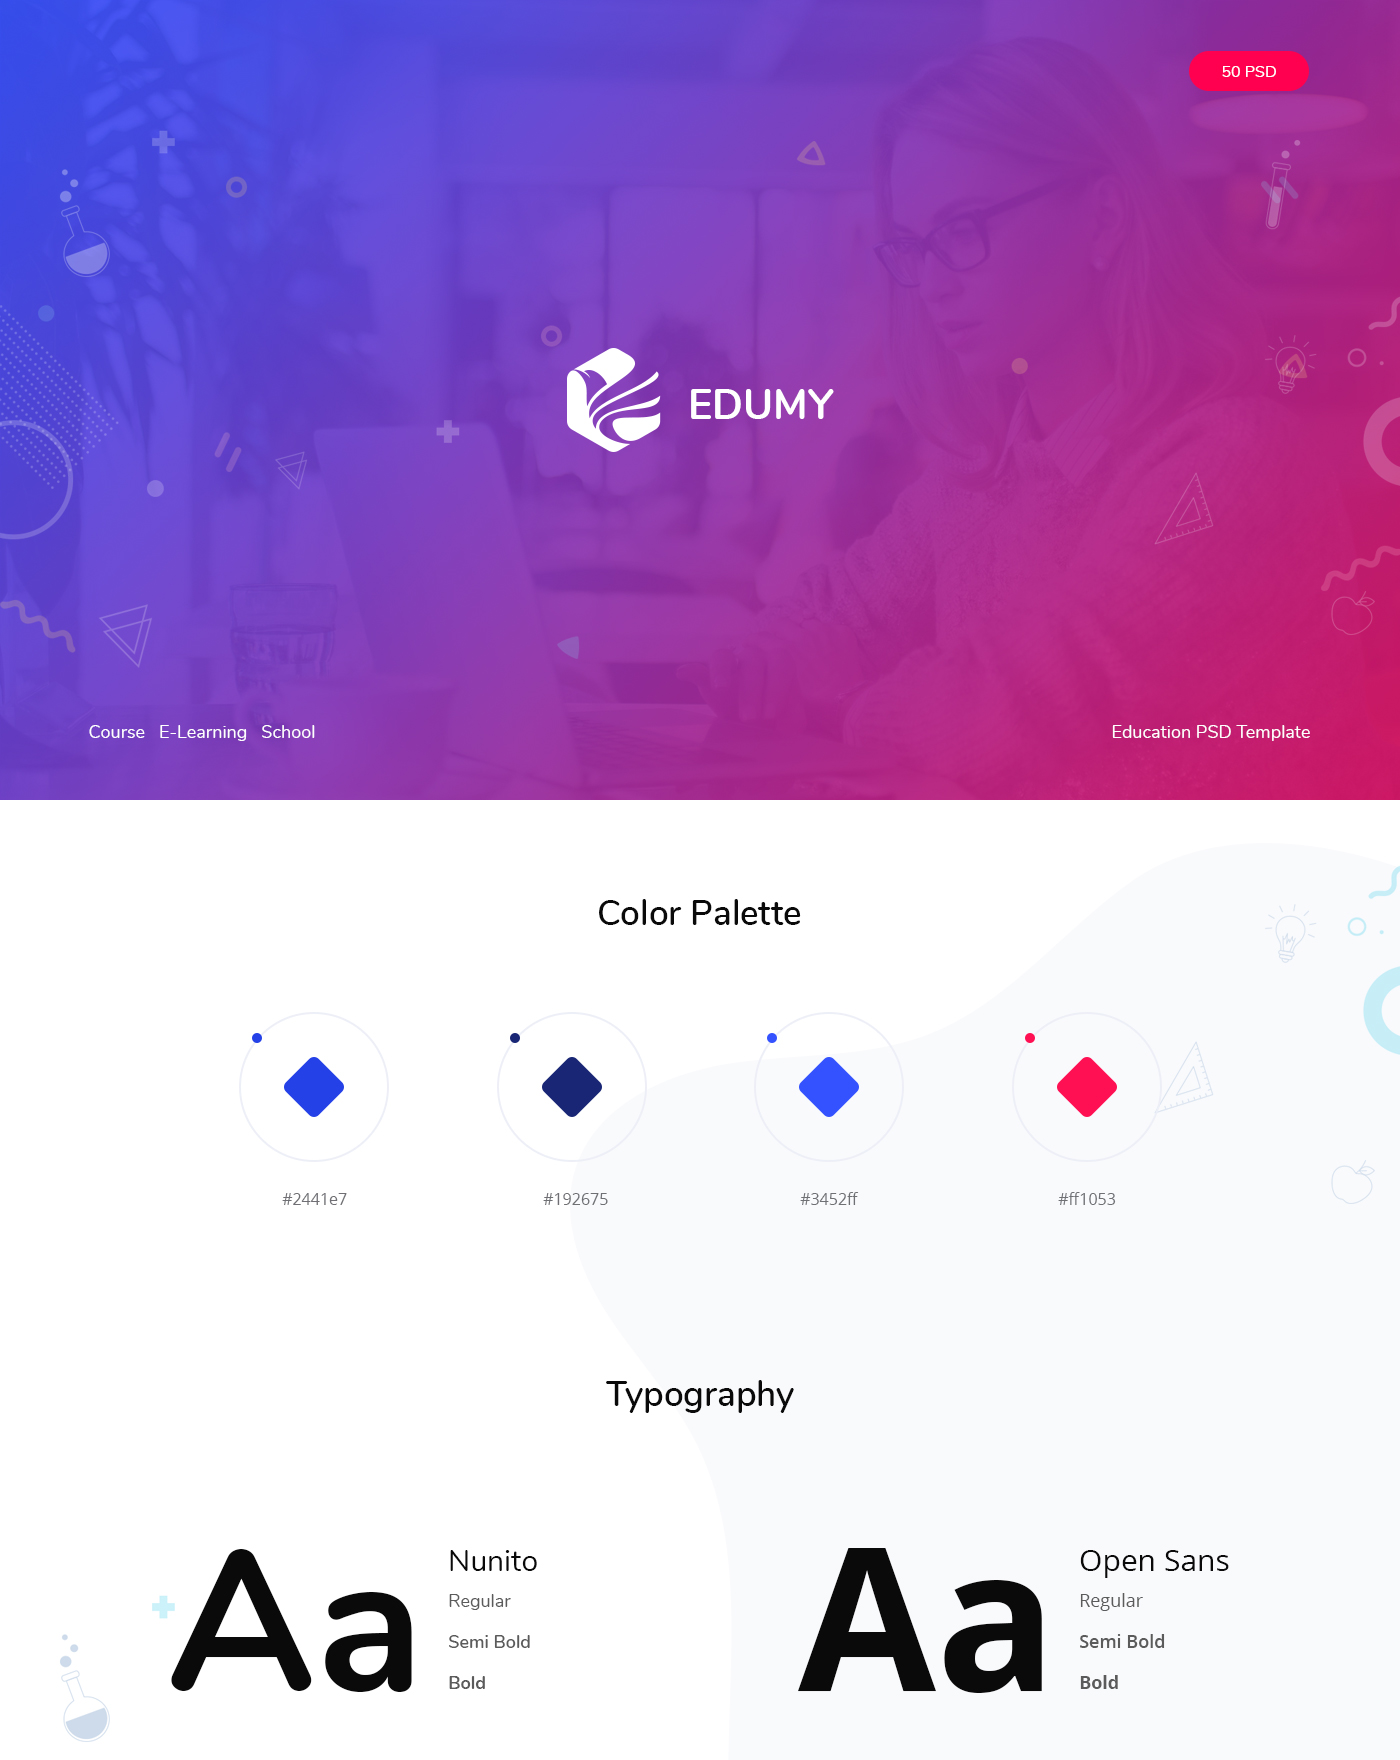 Edumy - LMS Online Education Course & School HTML Template - 2